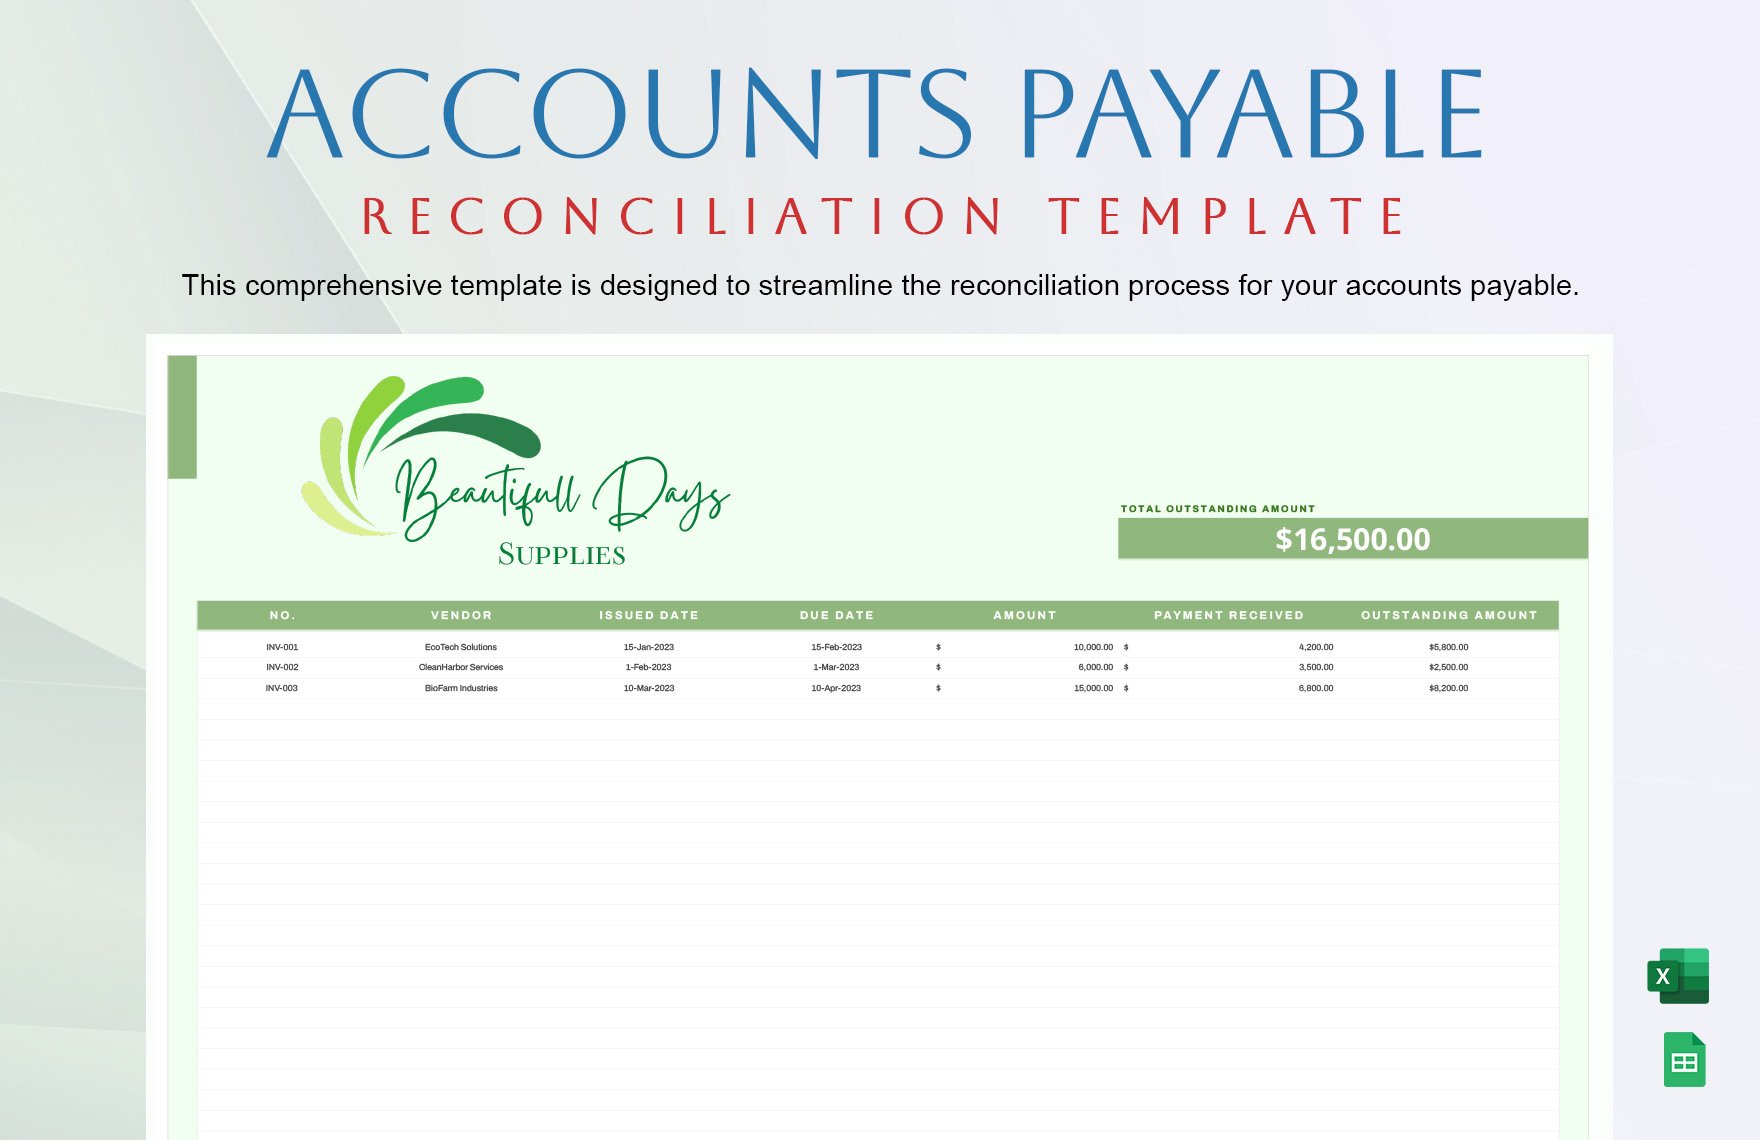 Accounts Payable Reconciliation Template